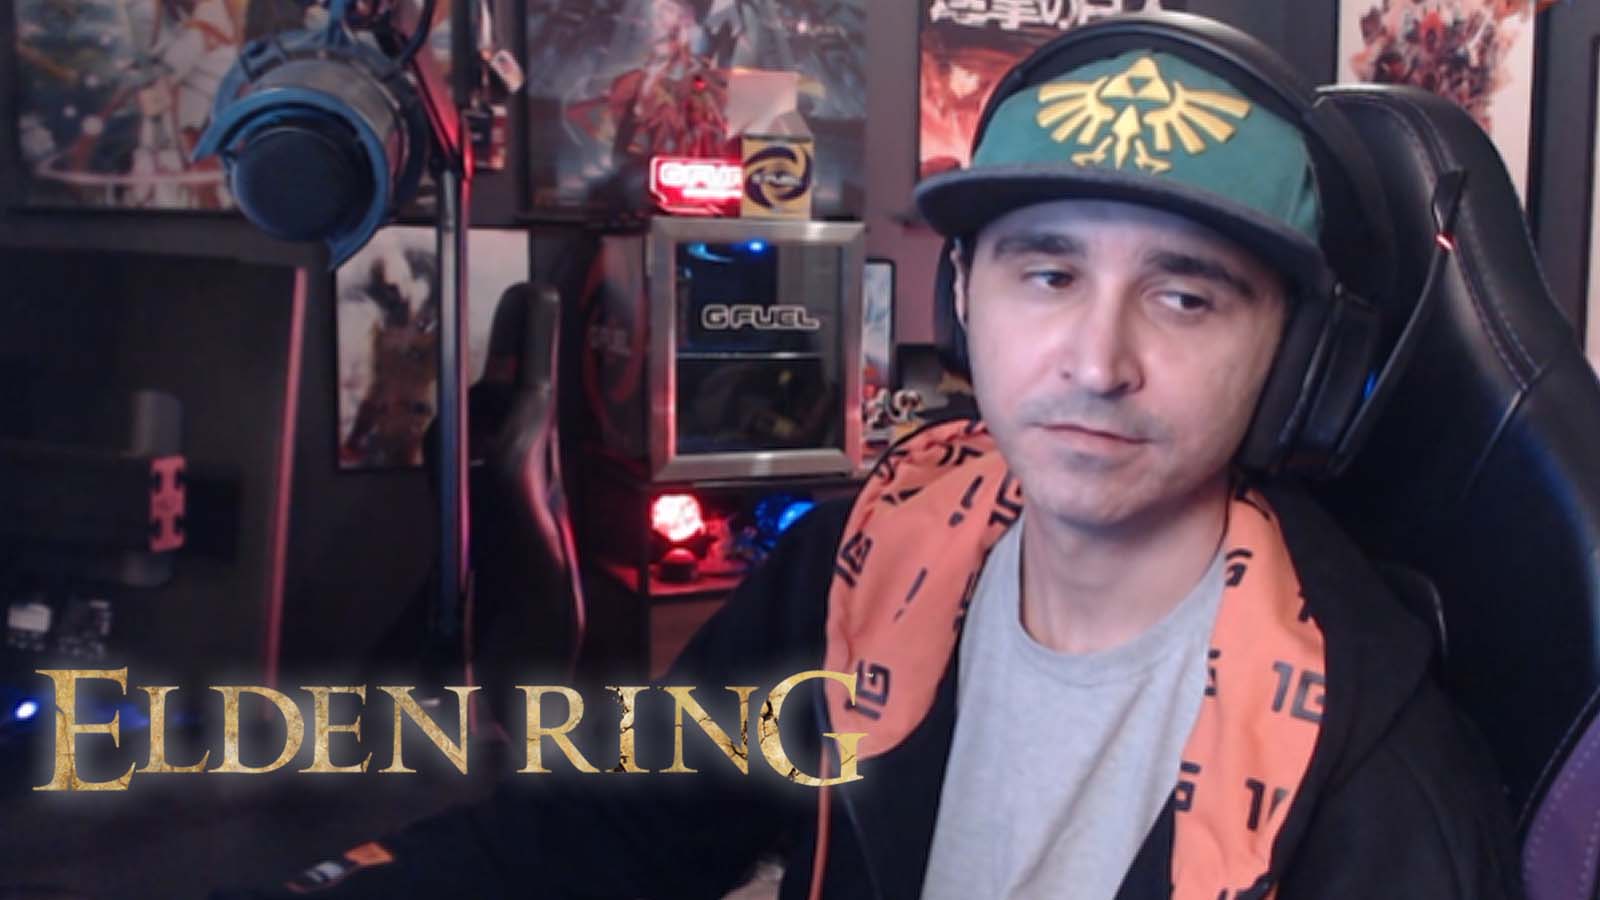 Summit1g rage-quits Elden Ring over “stupid” feature, but he's not